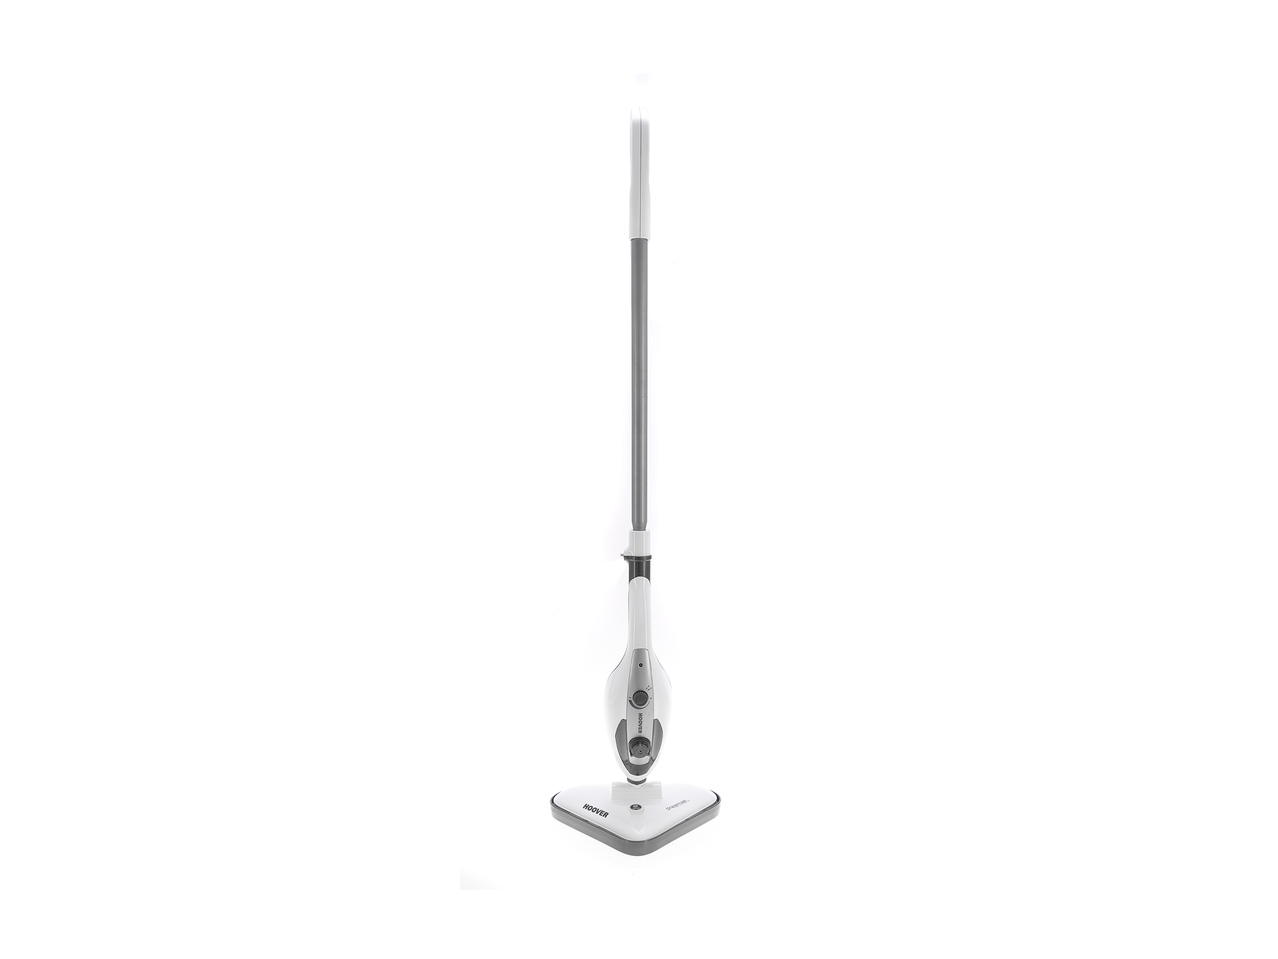 Hoover 2-in-1 Steam Cleaner1